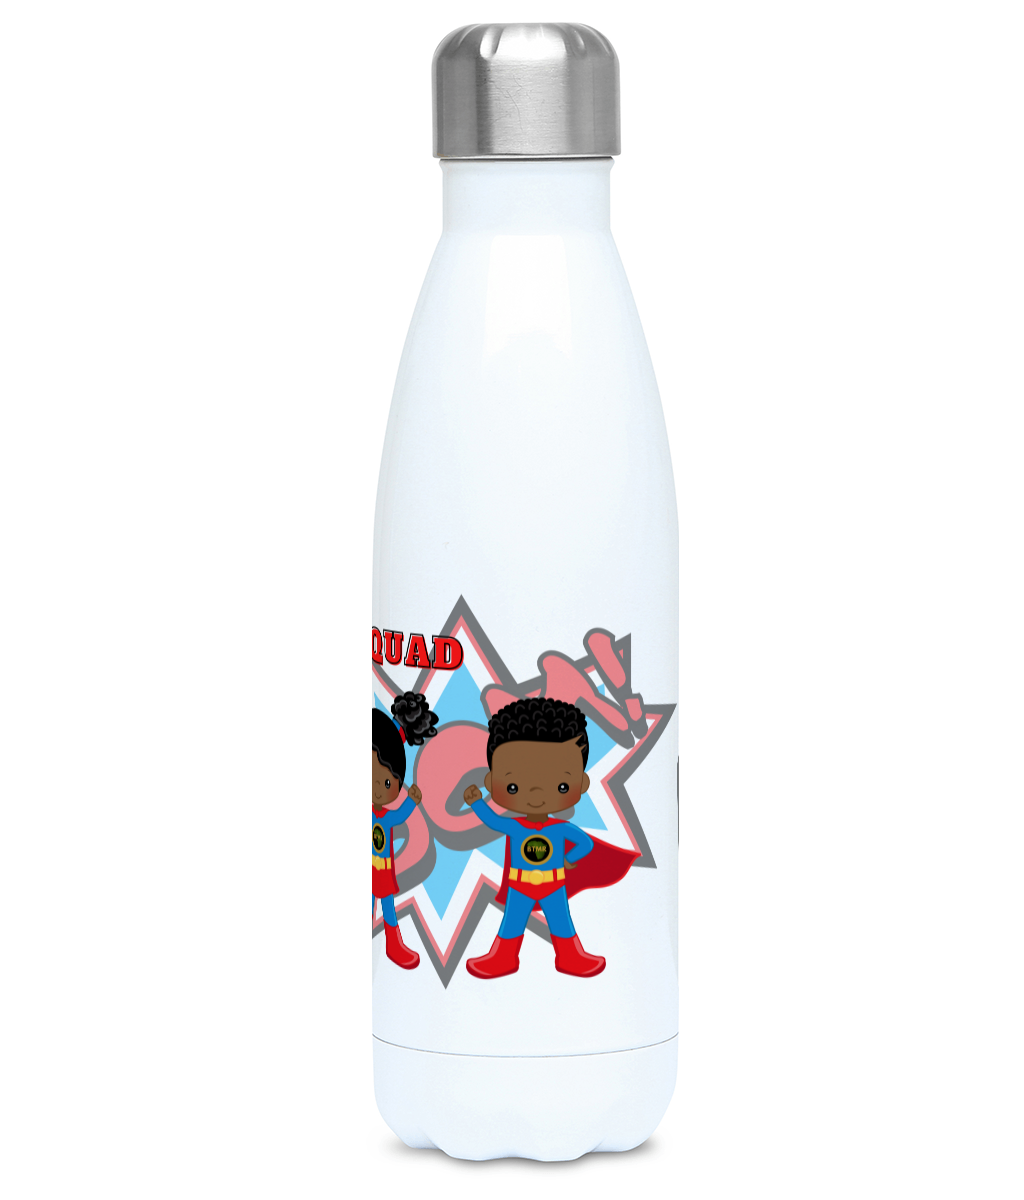 Centre Profile of personalised Hydro Flask, featuring  4 characters from the BlackLikeMe SuperHero collection, 2 boy superheroes - in grey and two girl superheroines in blue and grey. Behind is an action background featuring the words Kapow and Boom. Hydro Flask is personalised at the top of the picture 